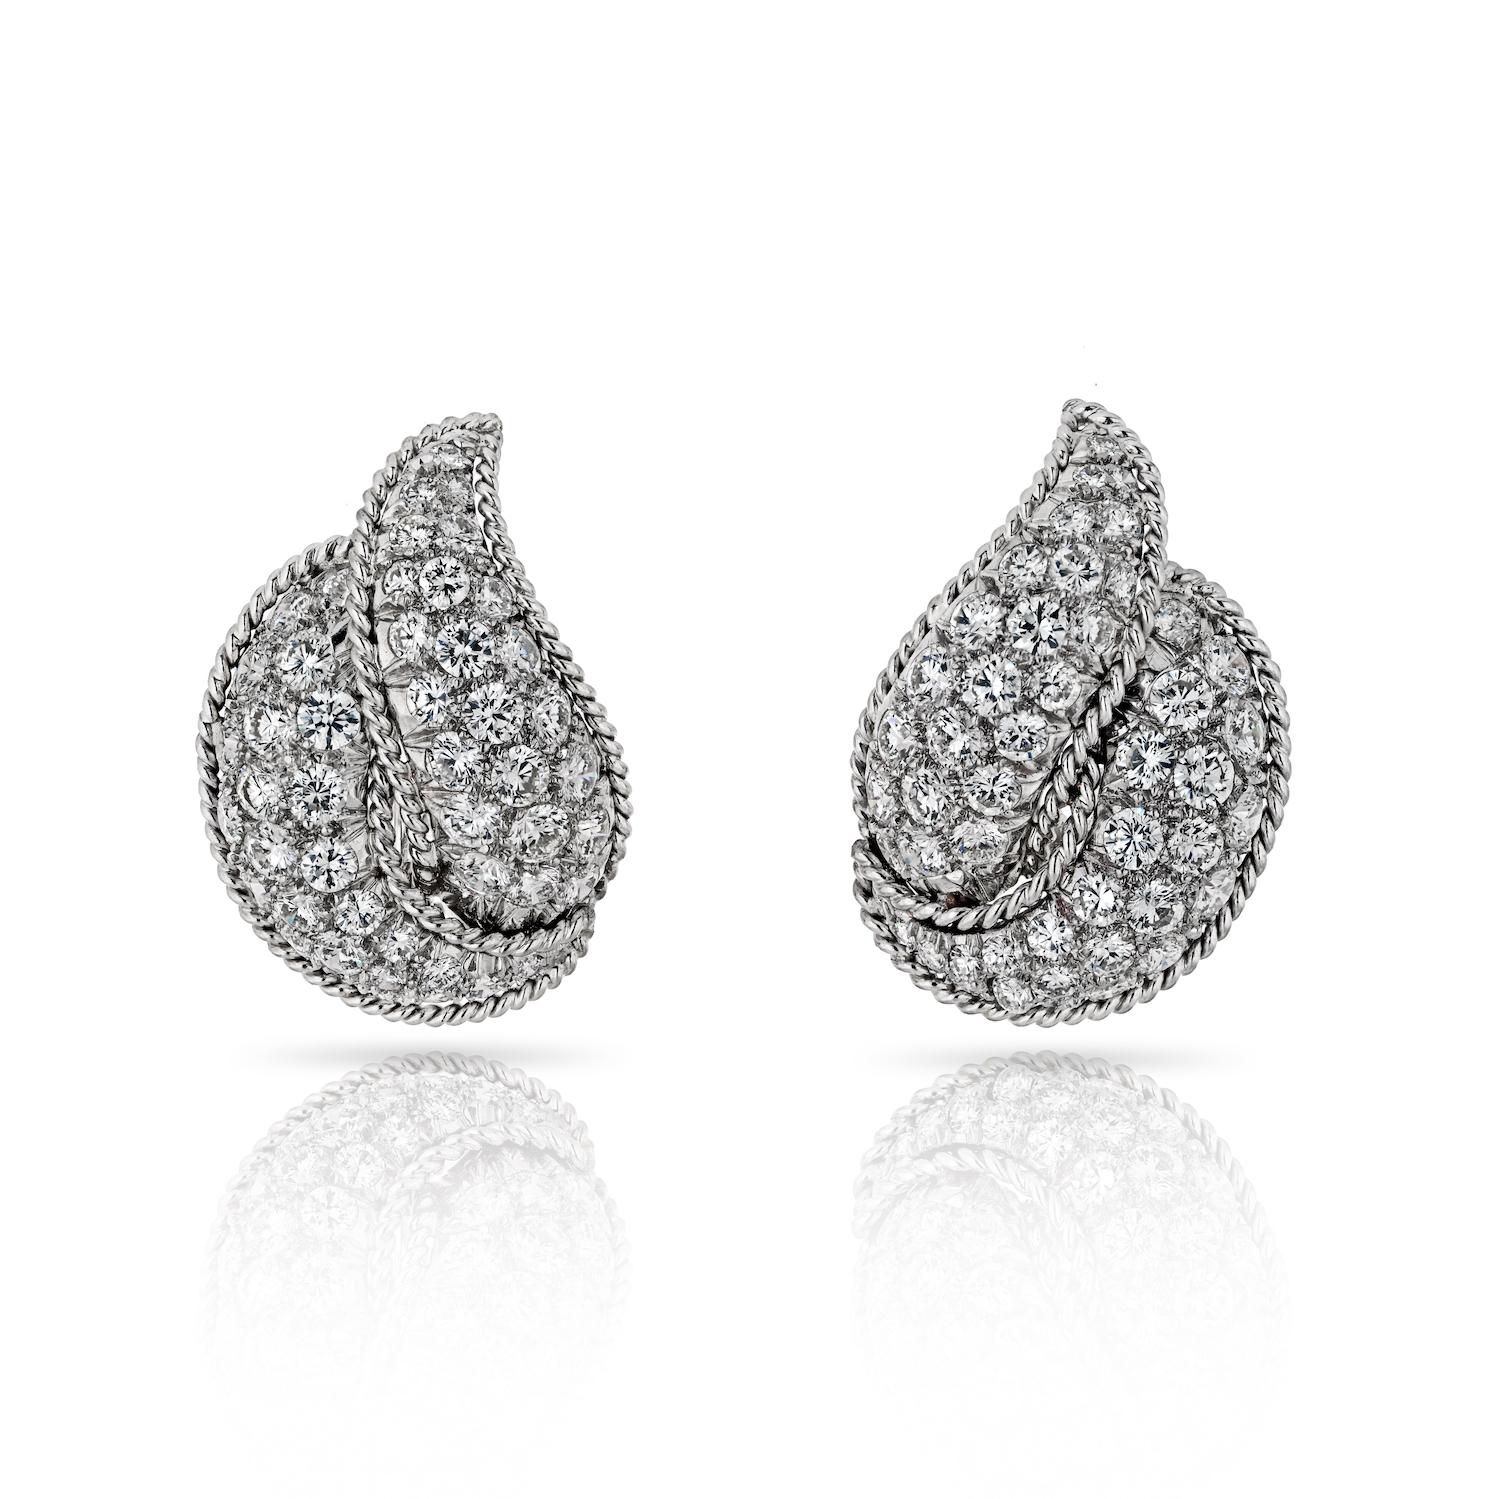 Step into the allure of the 1970s with these Circa Platinum 8.00 Carat Clip-On Diamond Earrings, a true embodiment of vintage glamour. The earrings boast a length of 25mm, allowing the soft leaf motif to gracefully frame your visage.

What makes